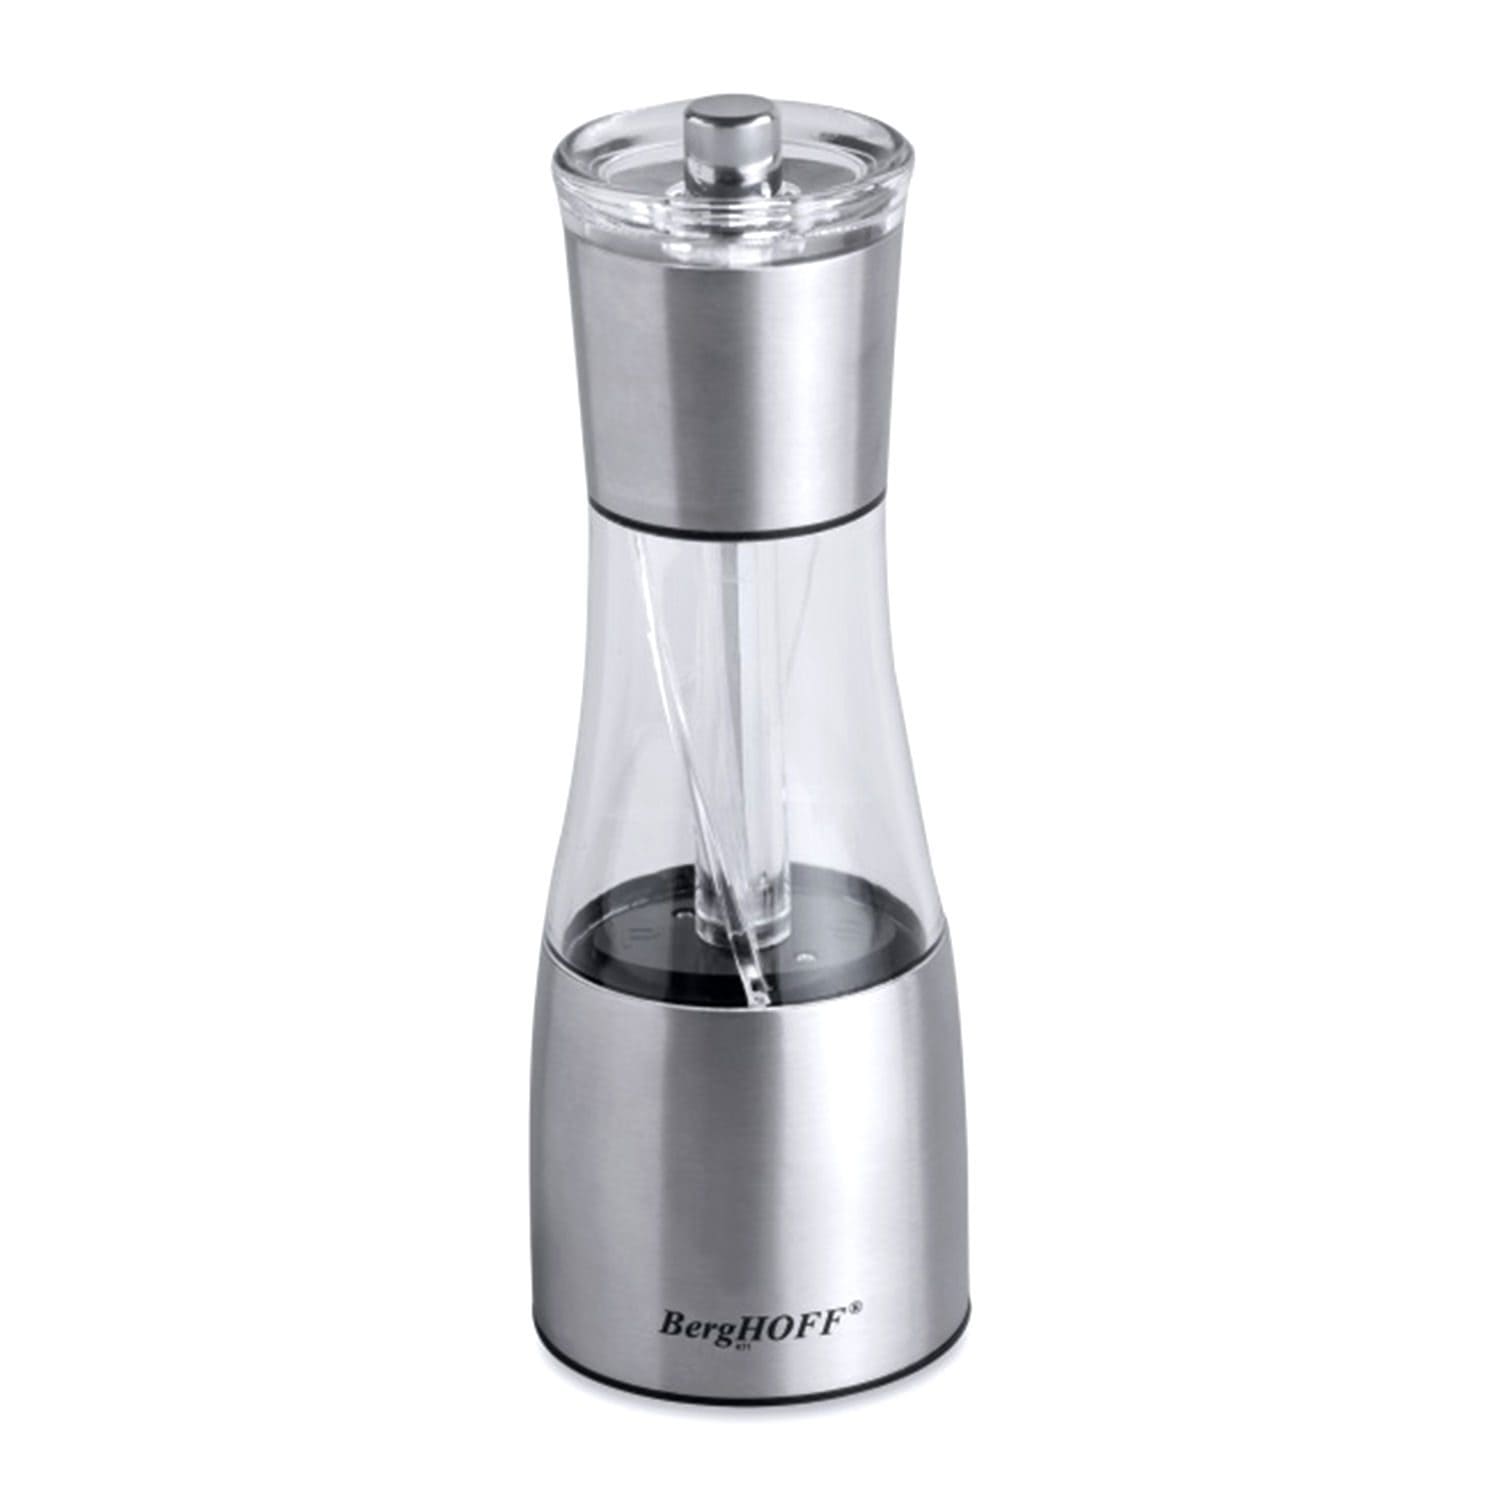 Essentials Salt and Pepper Mill - Silver and Clear, 19 cm - 1106244 - 1106244